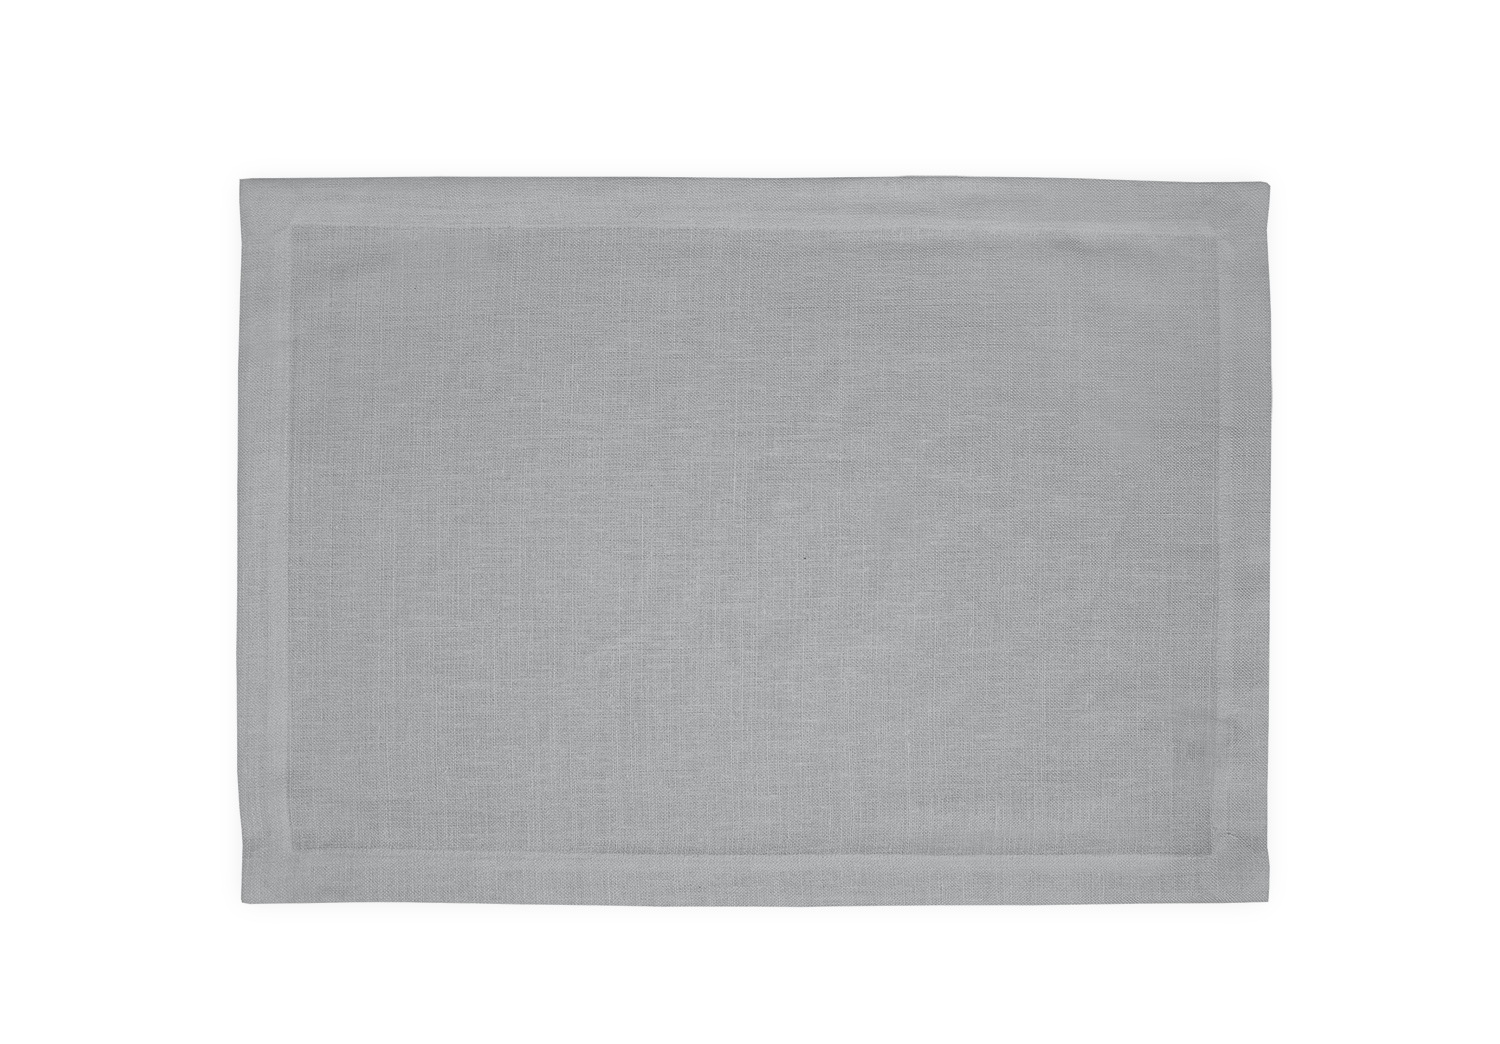 https://matouk-website.imgix.net/spree/products/3206/original/Chamant_placemat_Silver_secondary.png?1523975148?auto=format